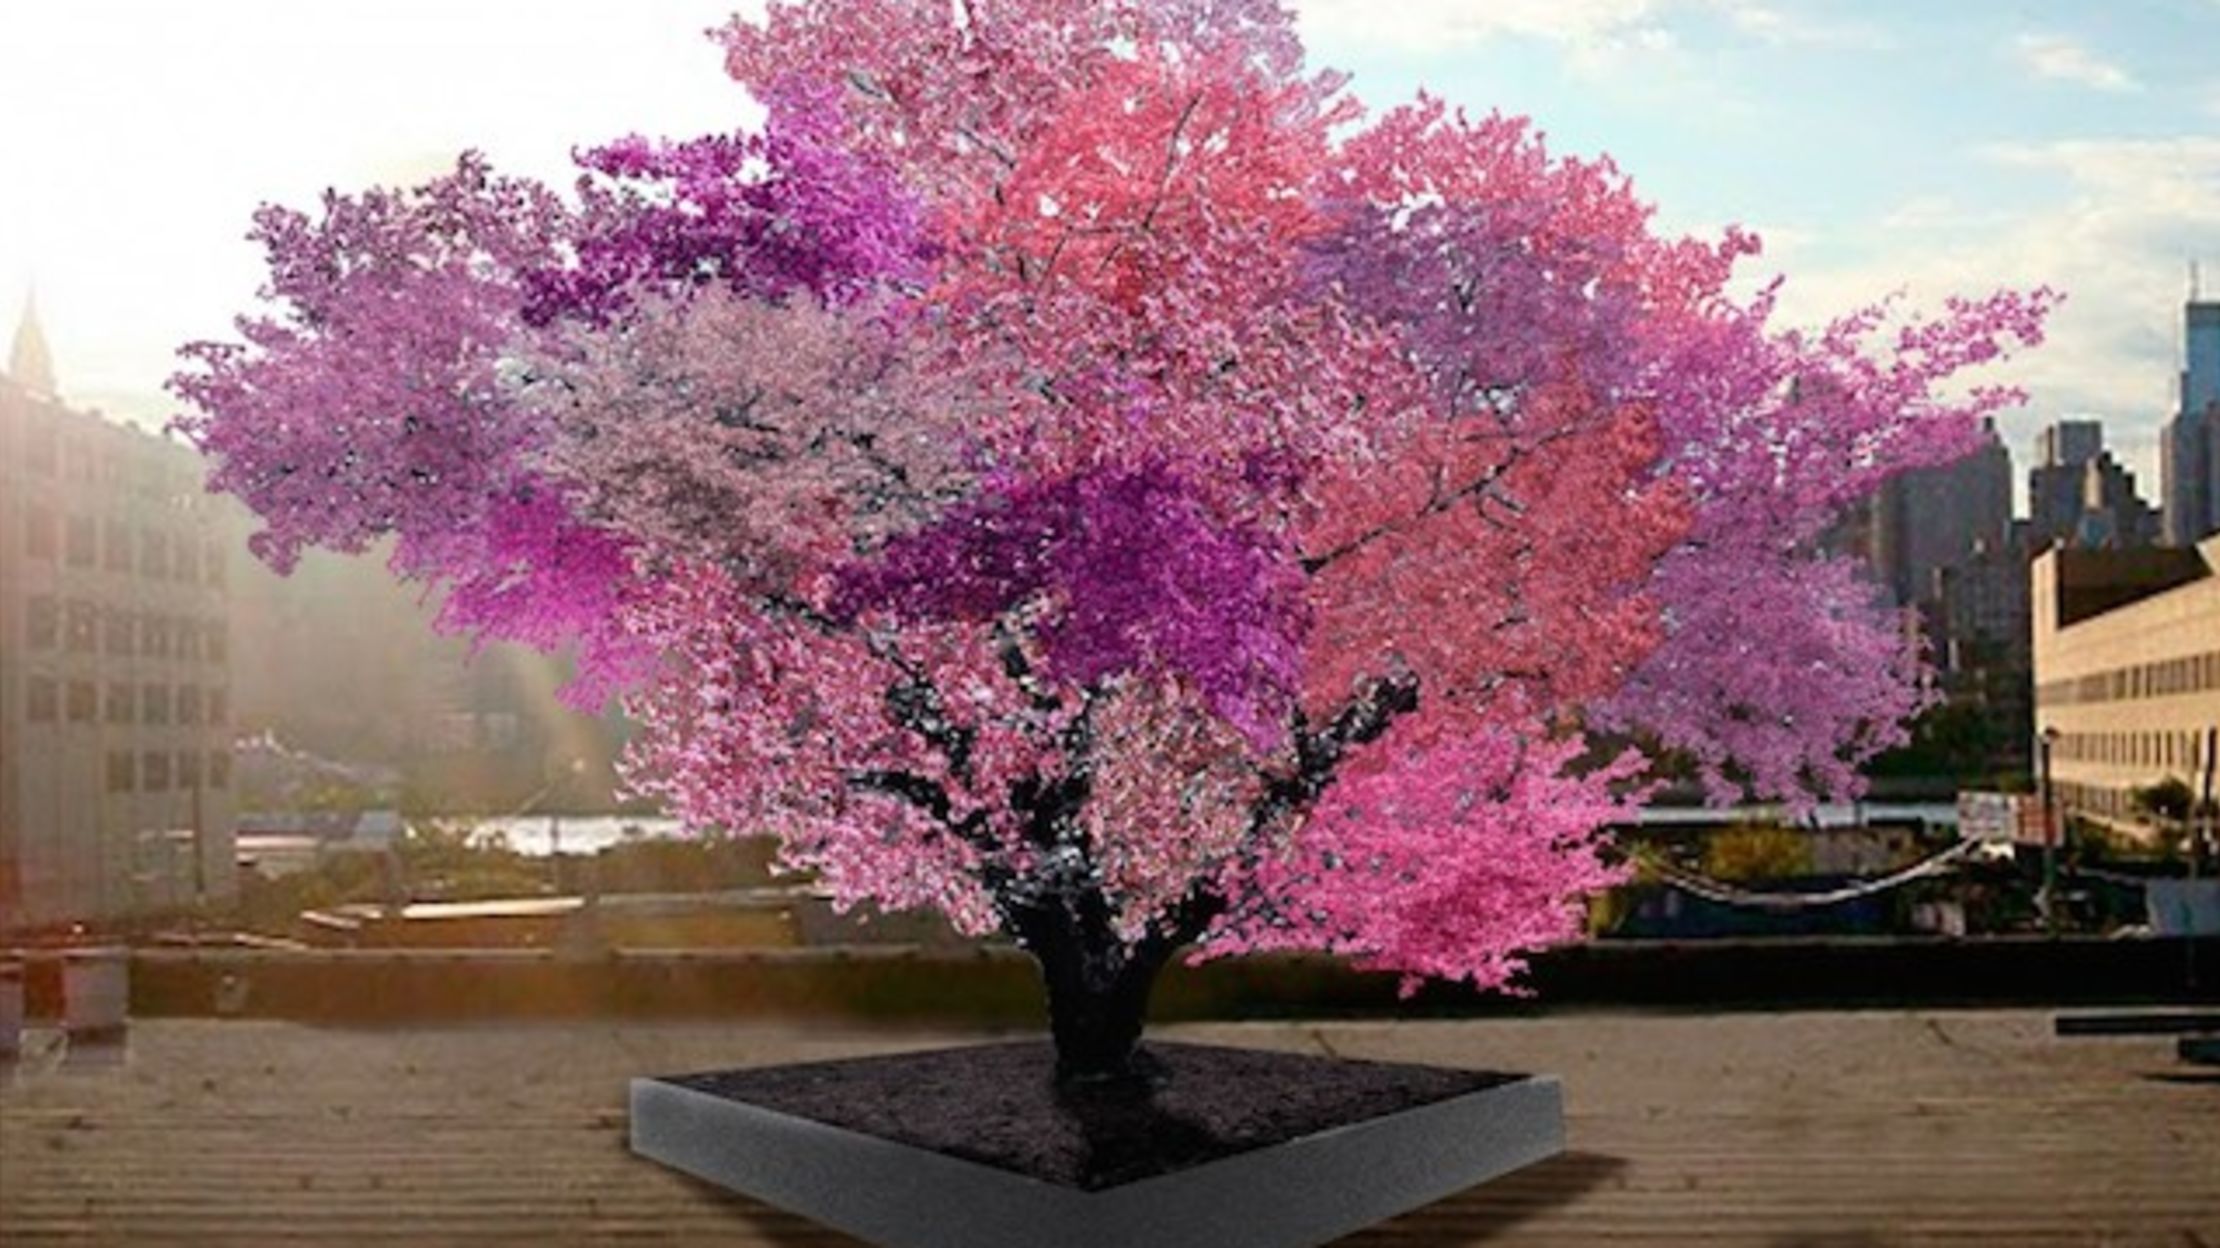 A Tree That Flowers With 40 Different Fruits | Mental Floss